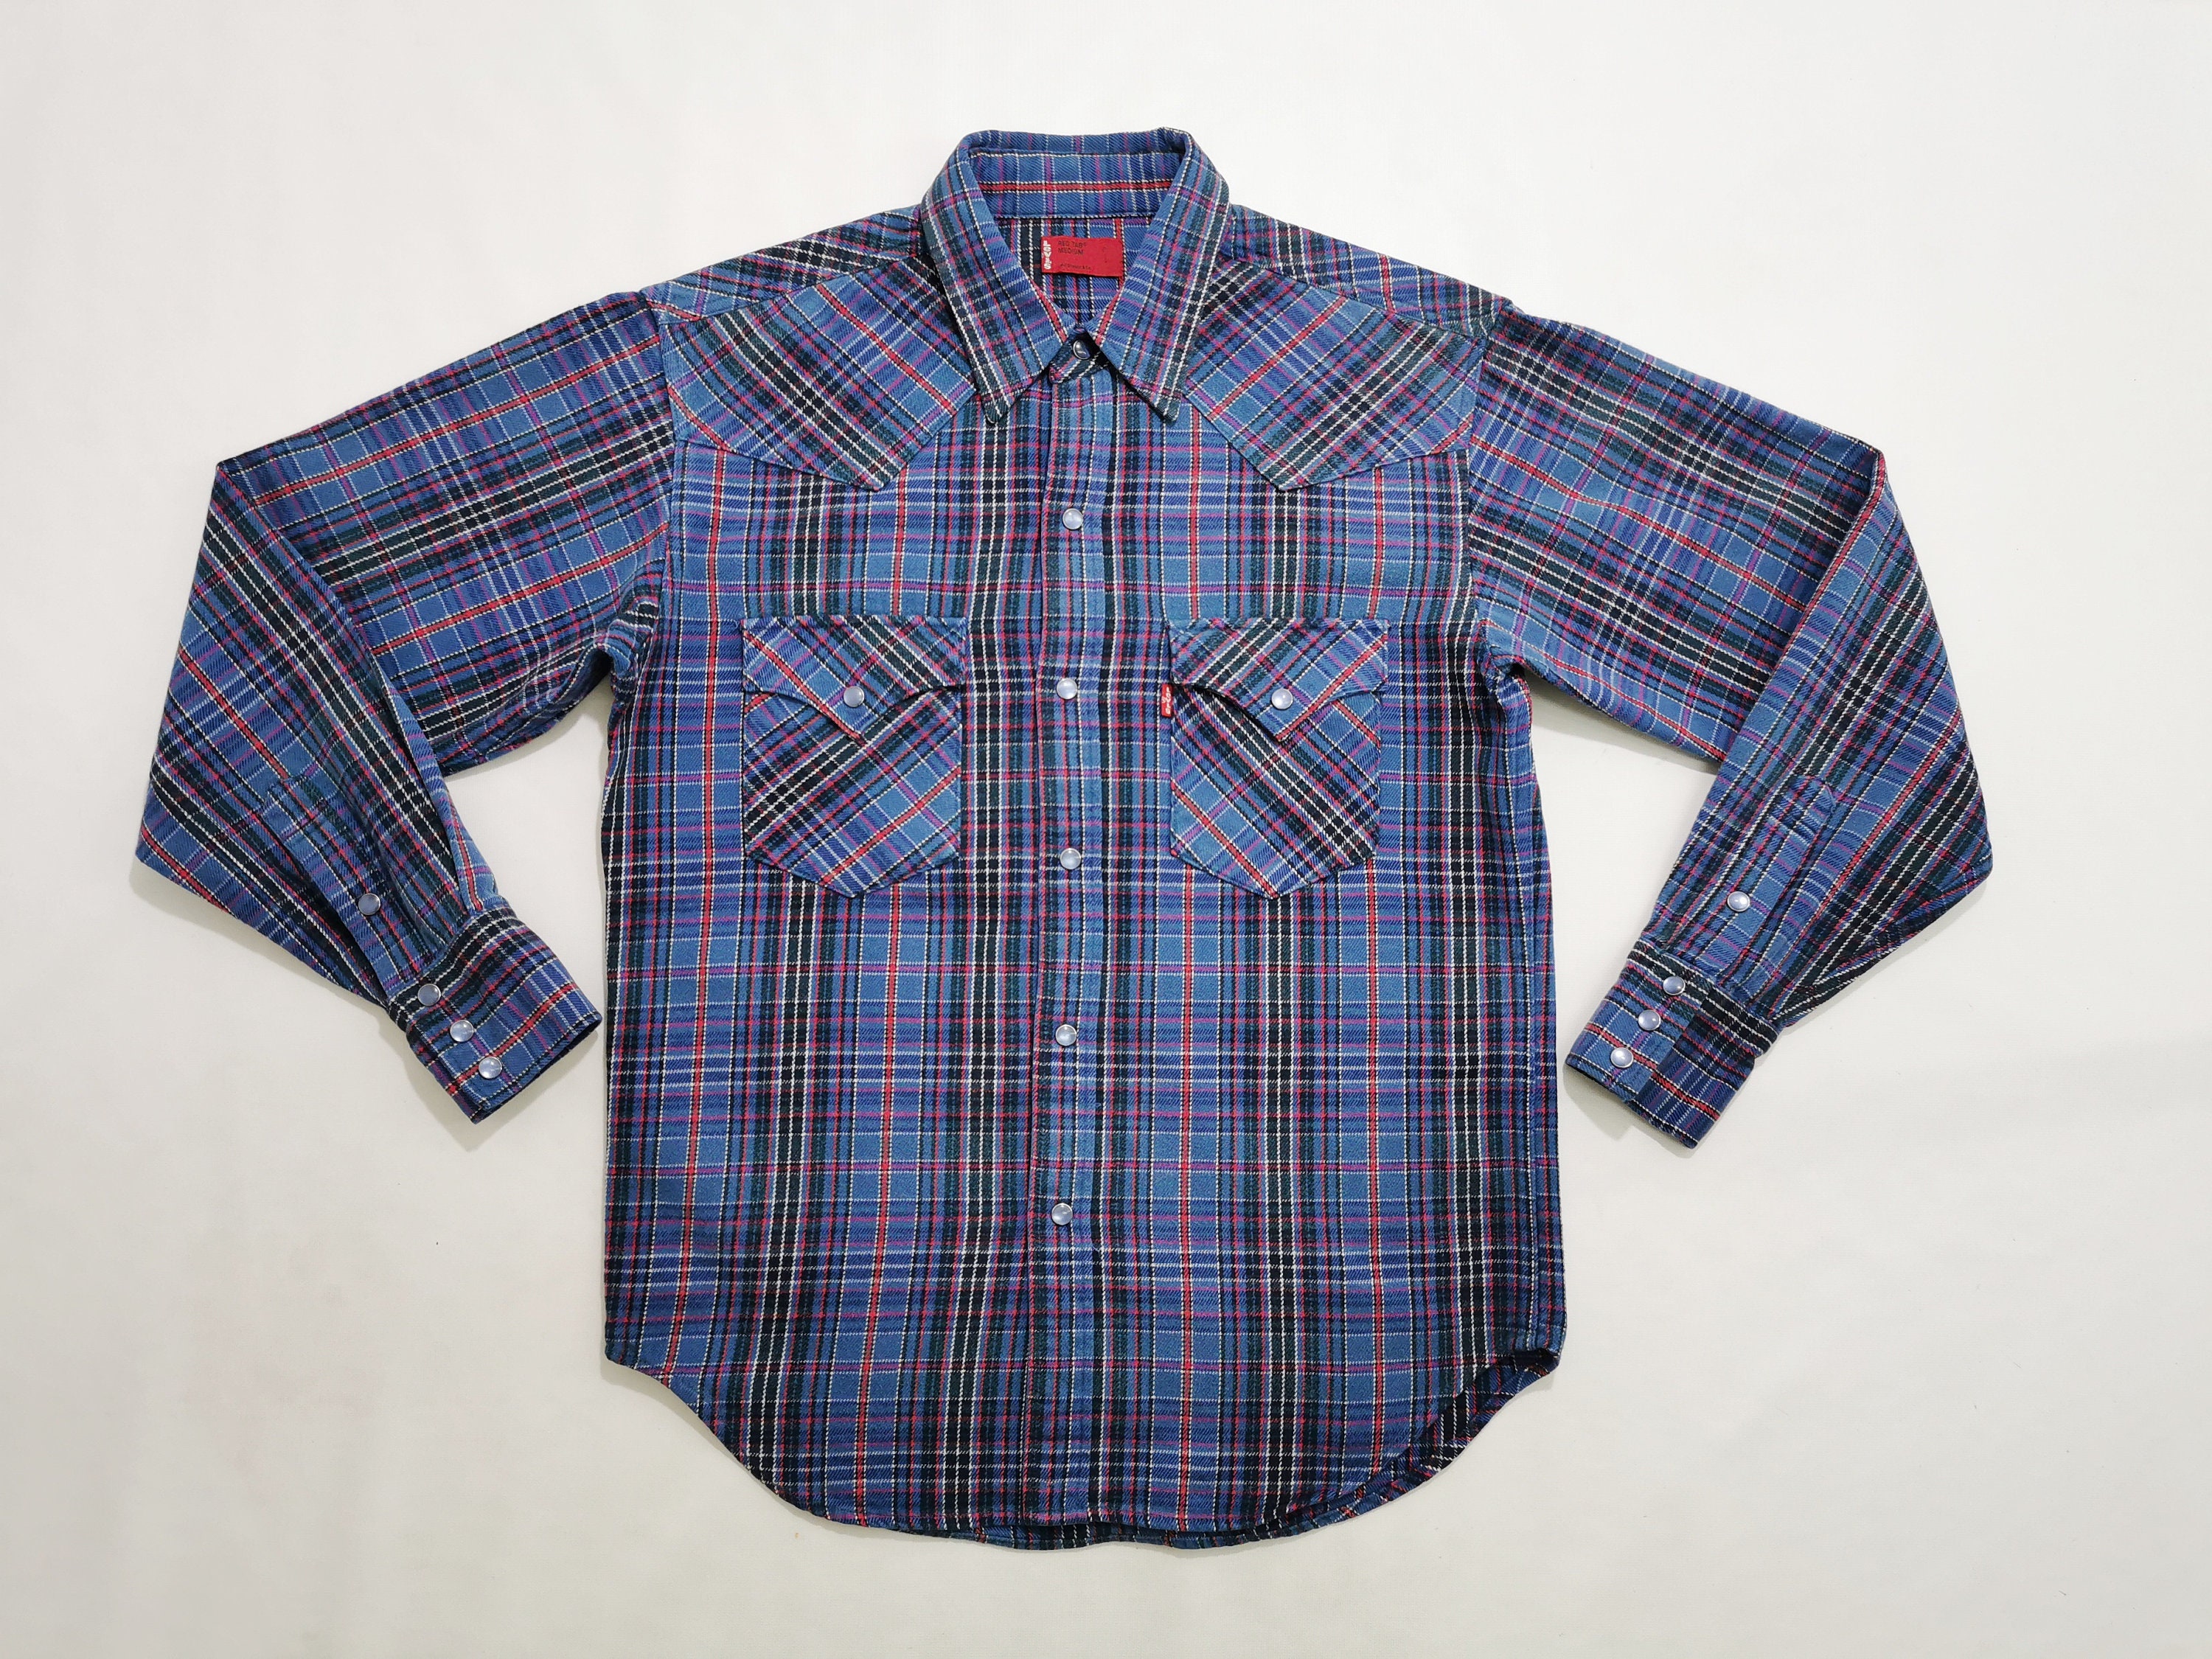 Levis Shirt Levis Checkered Shirt Vintage Levis Red Tab - Etsy